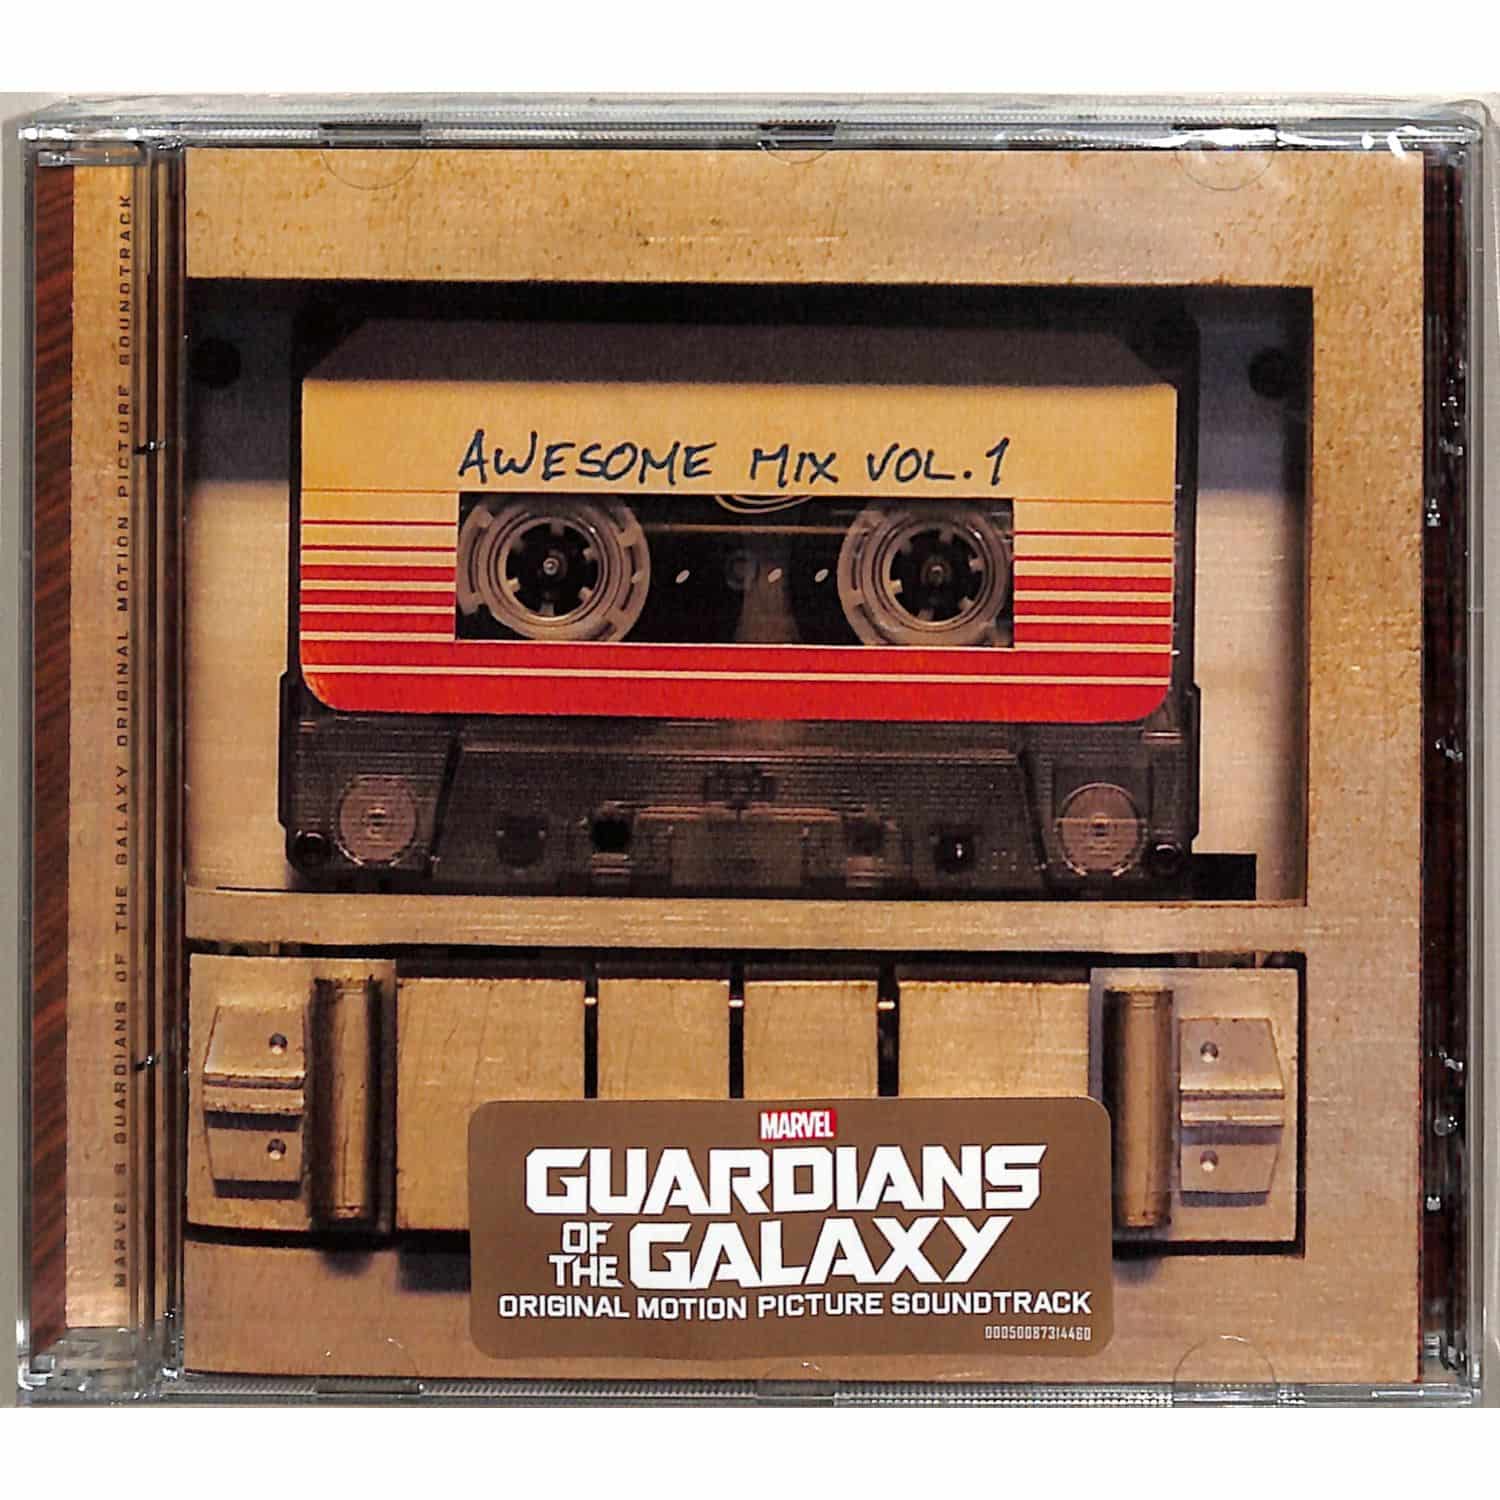 OST/Various - GUARDIANS OF THE GALAXY: AWESOME MIX VOL.1 